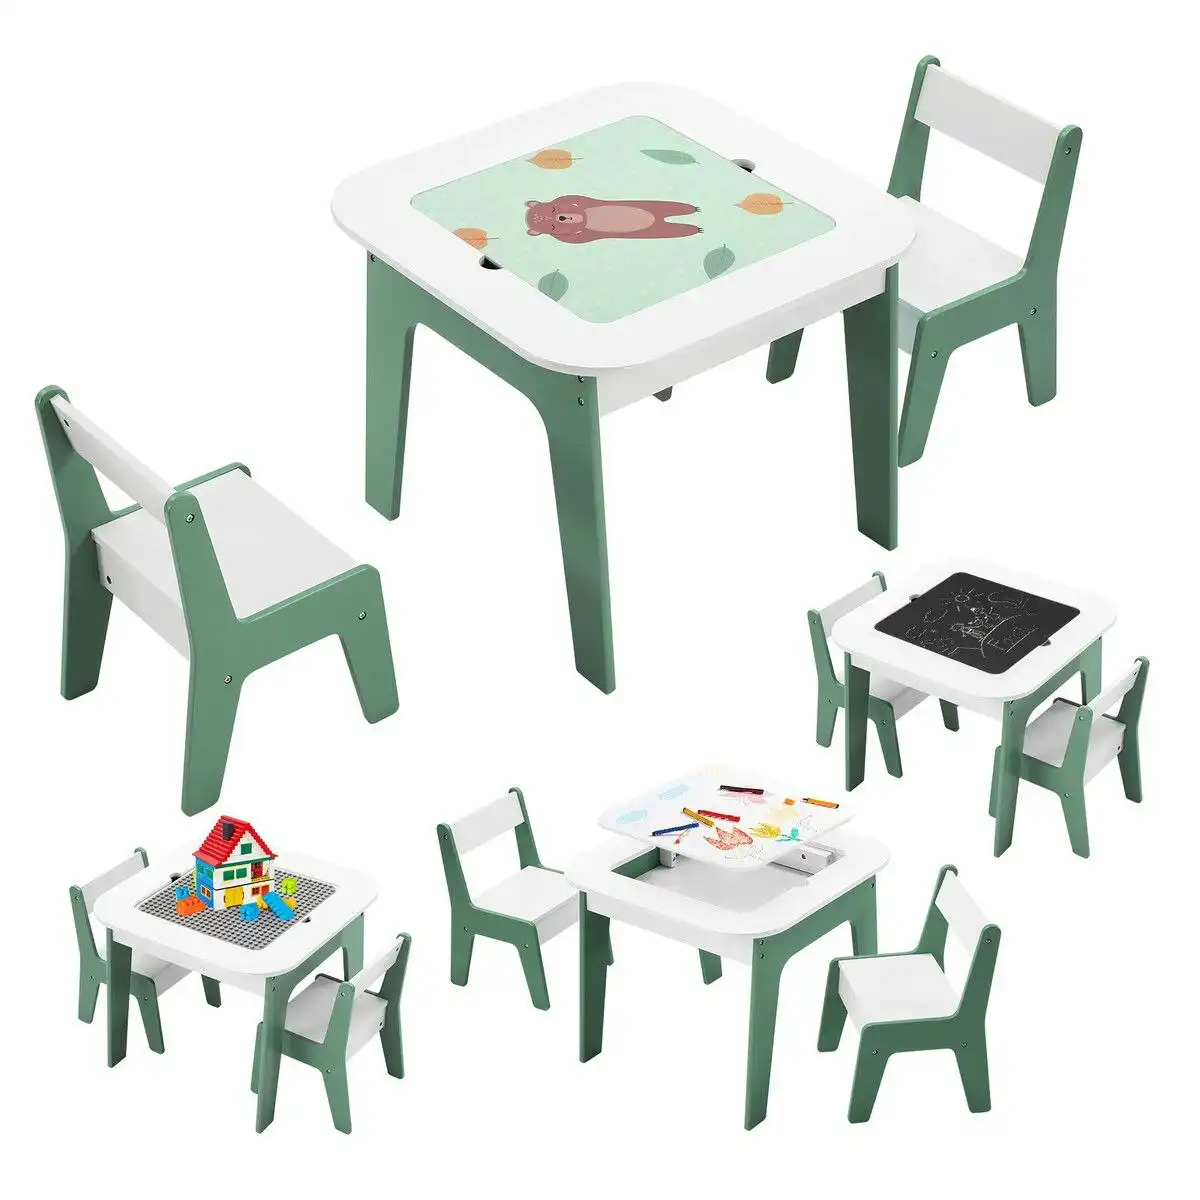 Kidbot 4 IN 1 Kids Table and Chairs Set Childrens Picnic Play Activity Centre Furniture Outdoor Indoor Study Craft Drawing Storage Desk with 2 Tabletops